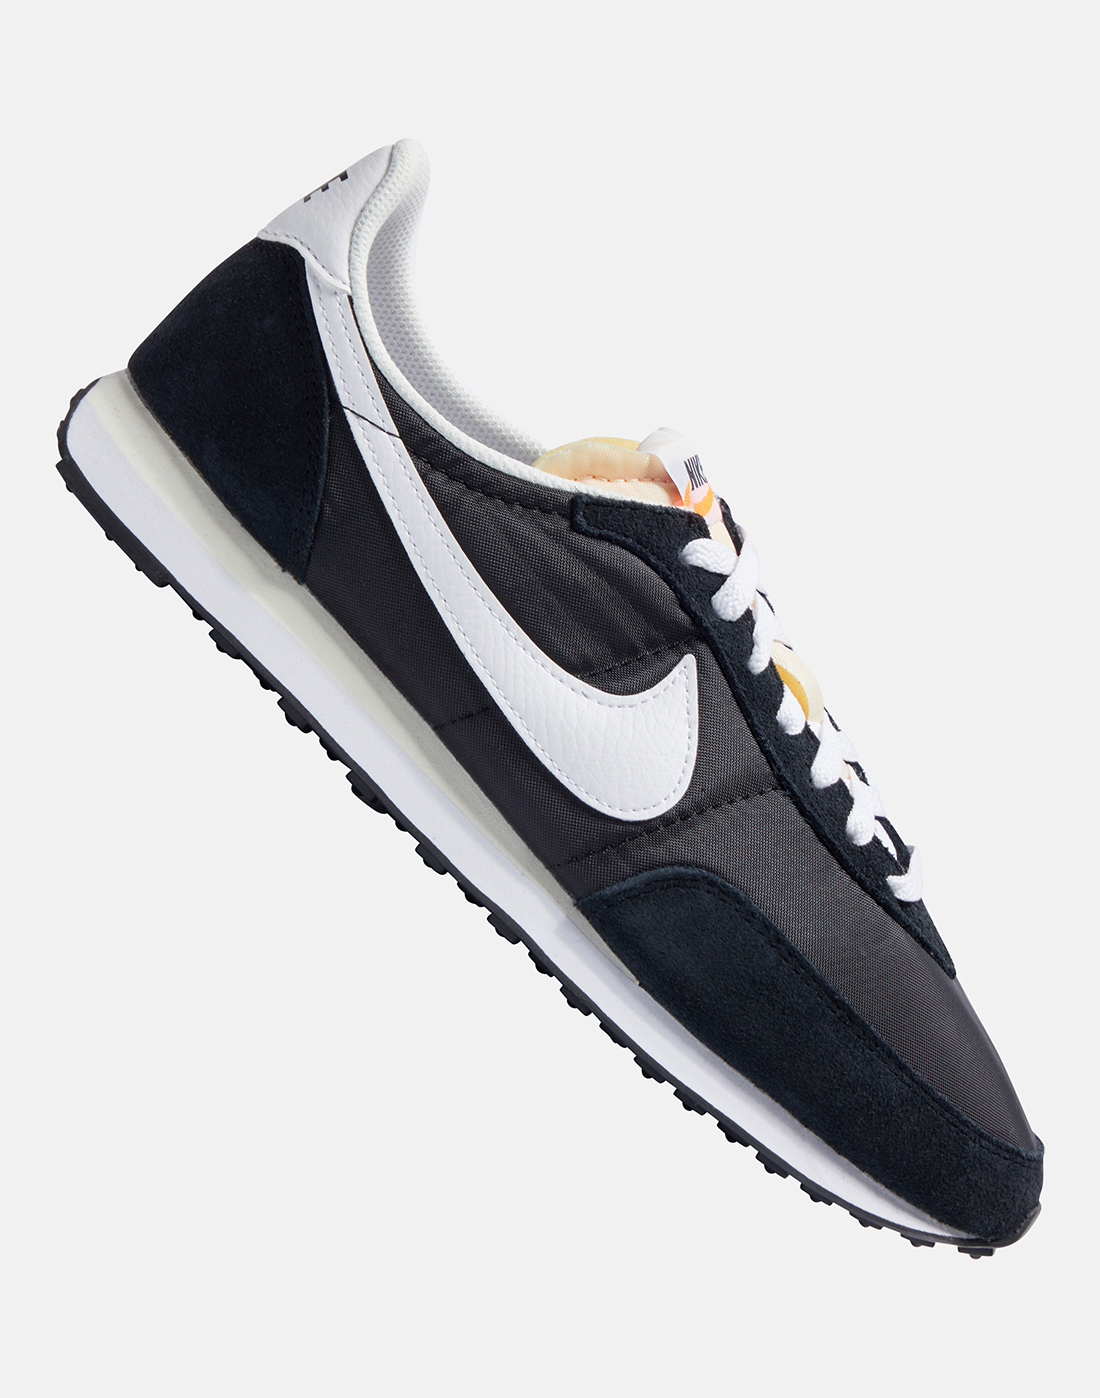 Nike Mens Waffle Two - Black | Life Style Sports IE